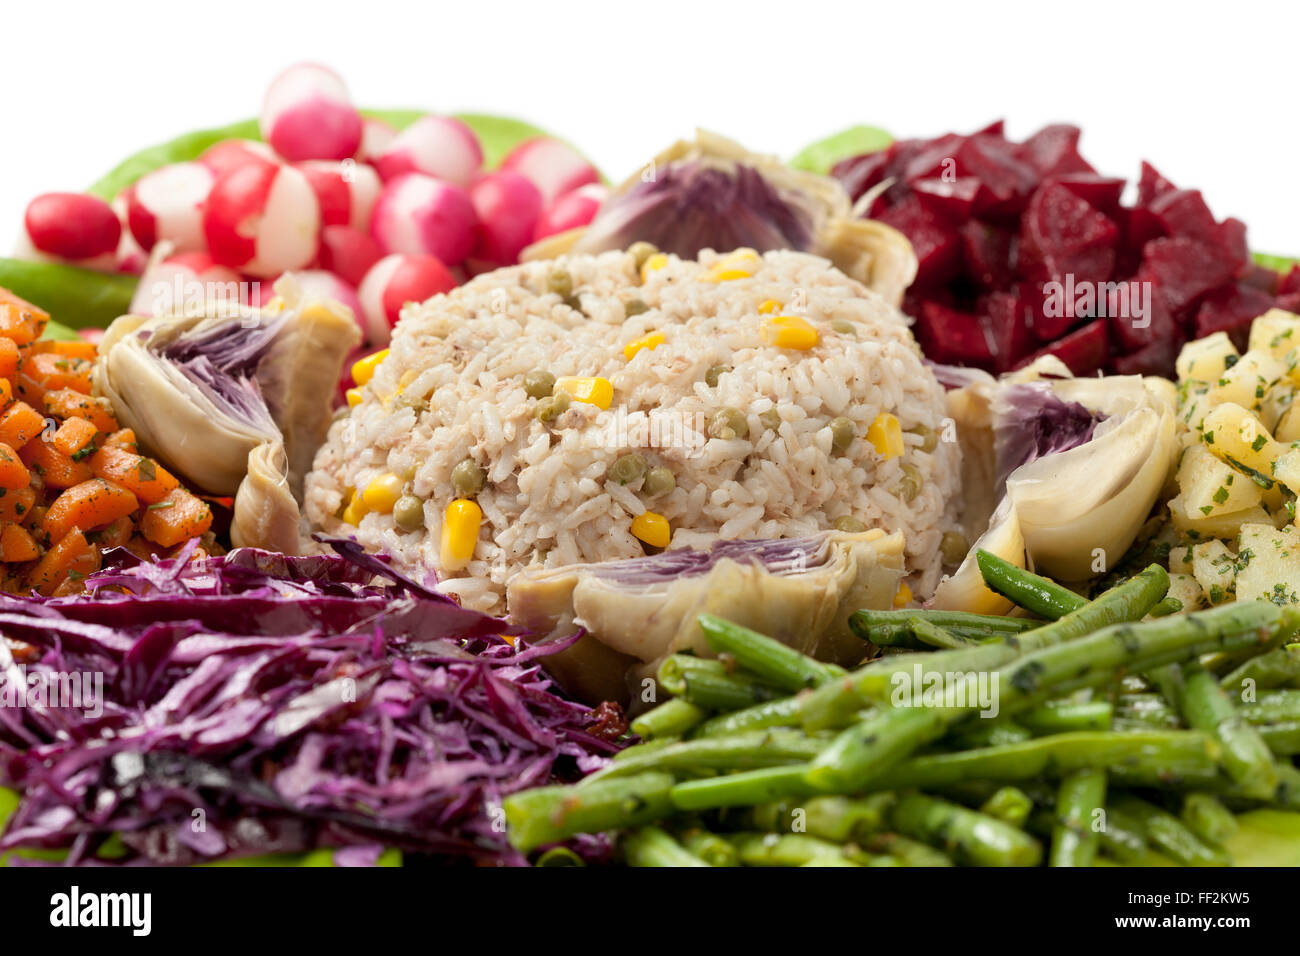 Traditional Moroccan dinner salad close up Stock Photo